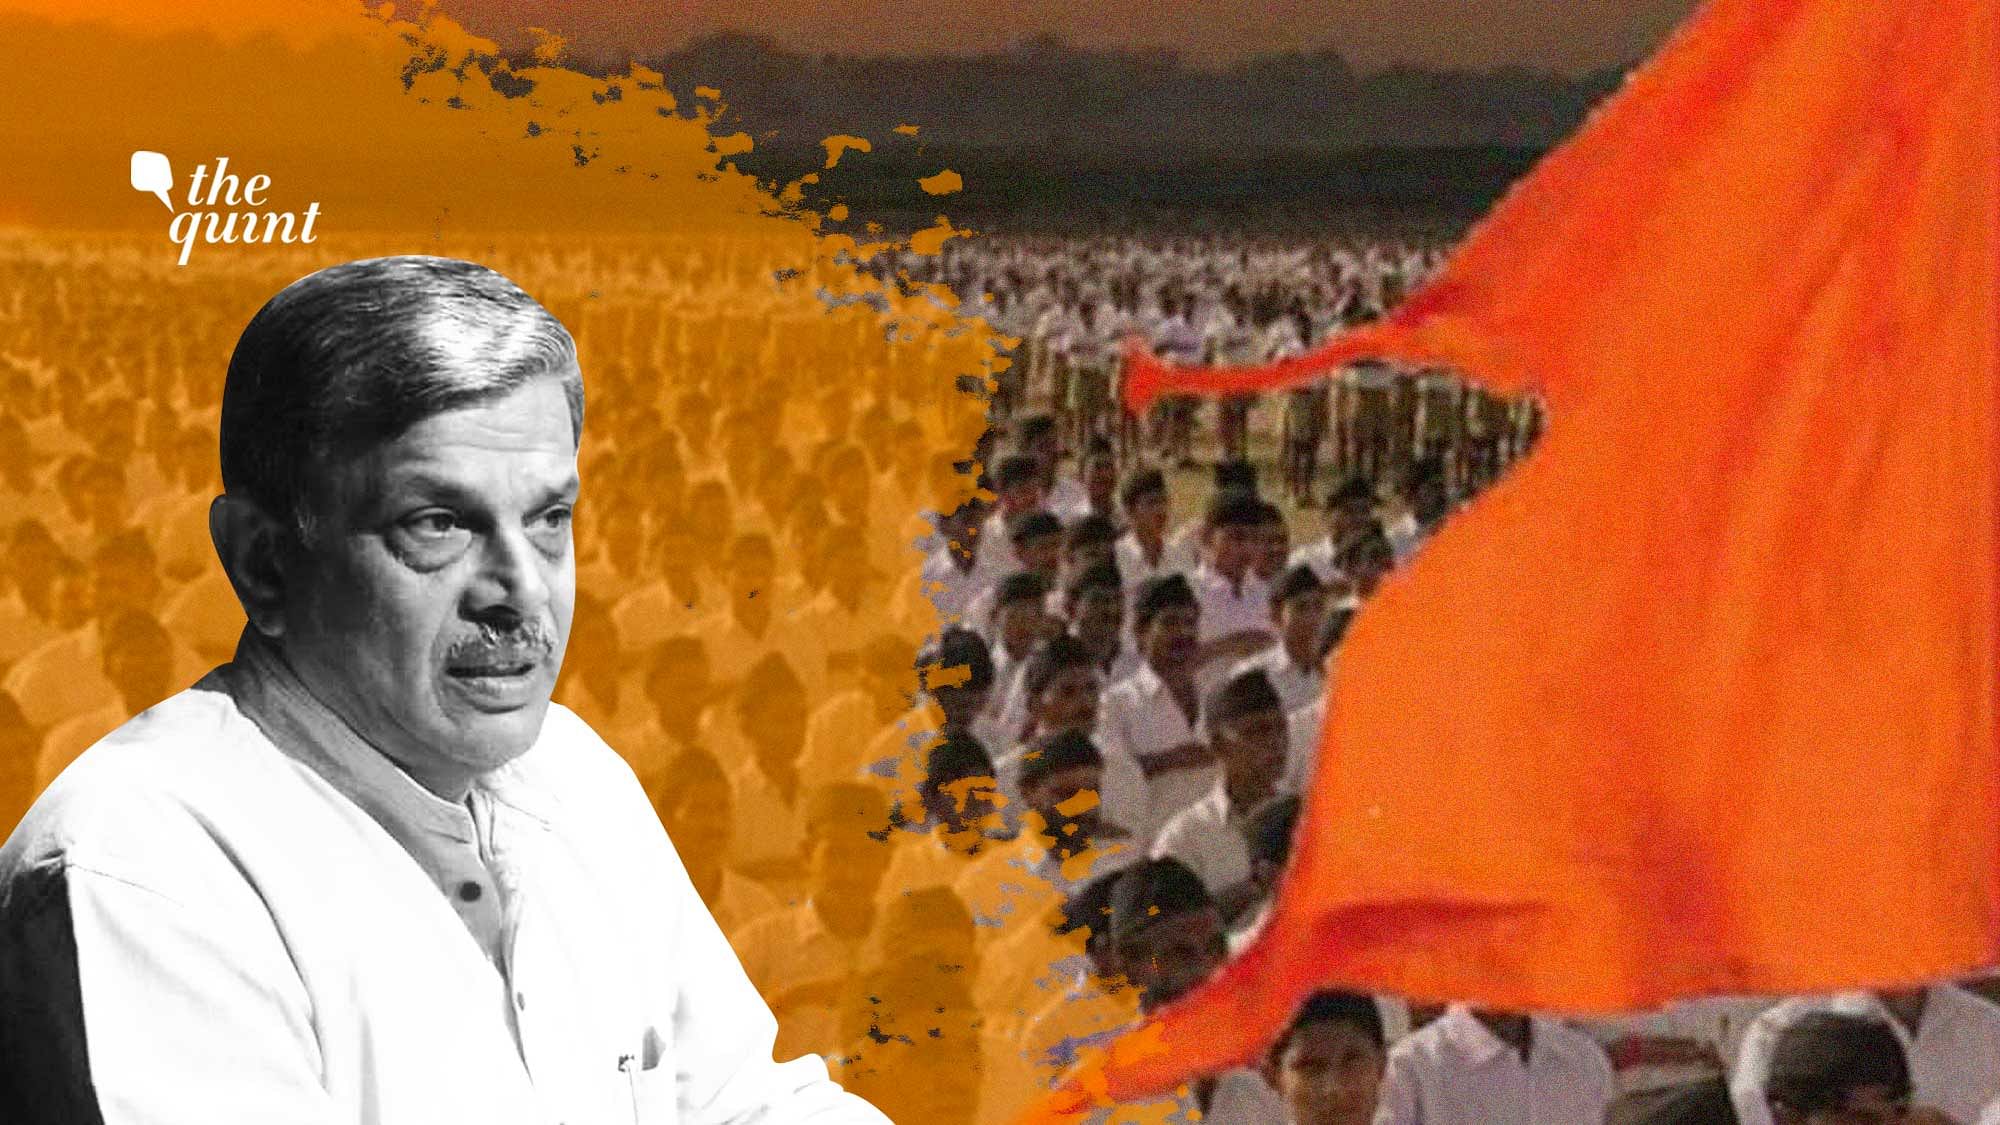 Image of new RSS Gen Secy Dattatreya Hosabale used for representational purposes.